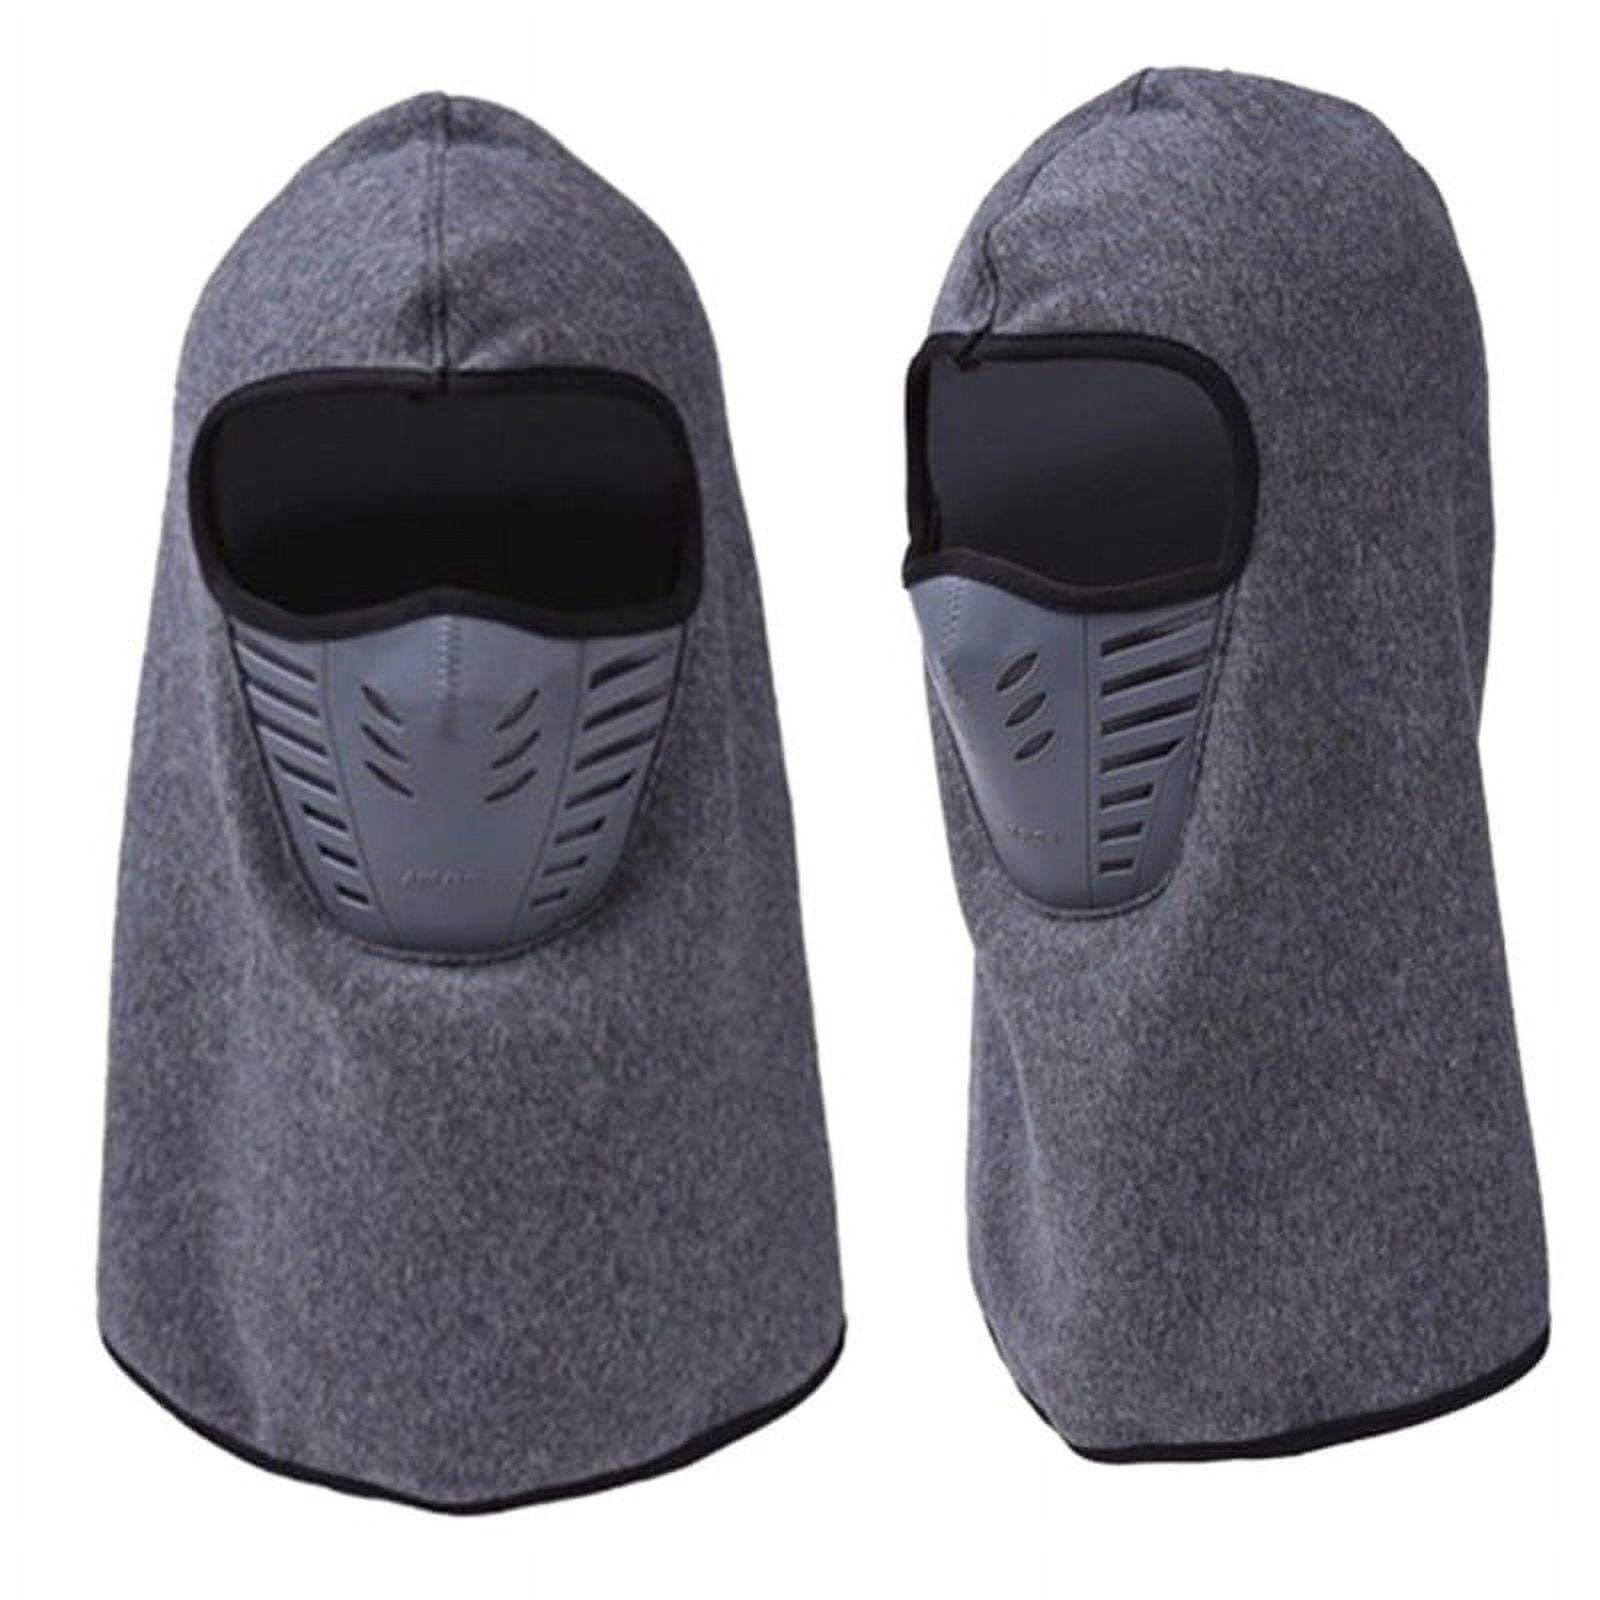 Winter Ski Mask Balaclava Neck Gaiter For Motorcycle, Hiking, Cycling,  Snowboarding Windproof And Warm Neck Scarf For Rain Gear For Bikers X0628  From Nickyoung08, $2.48